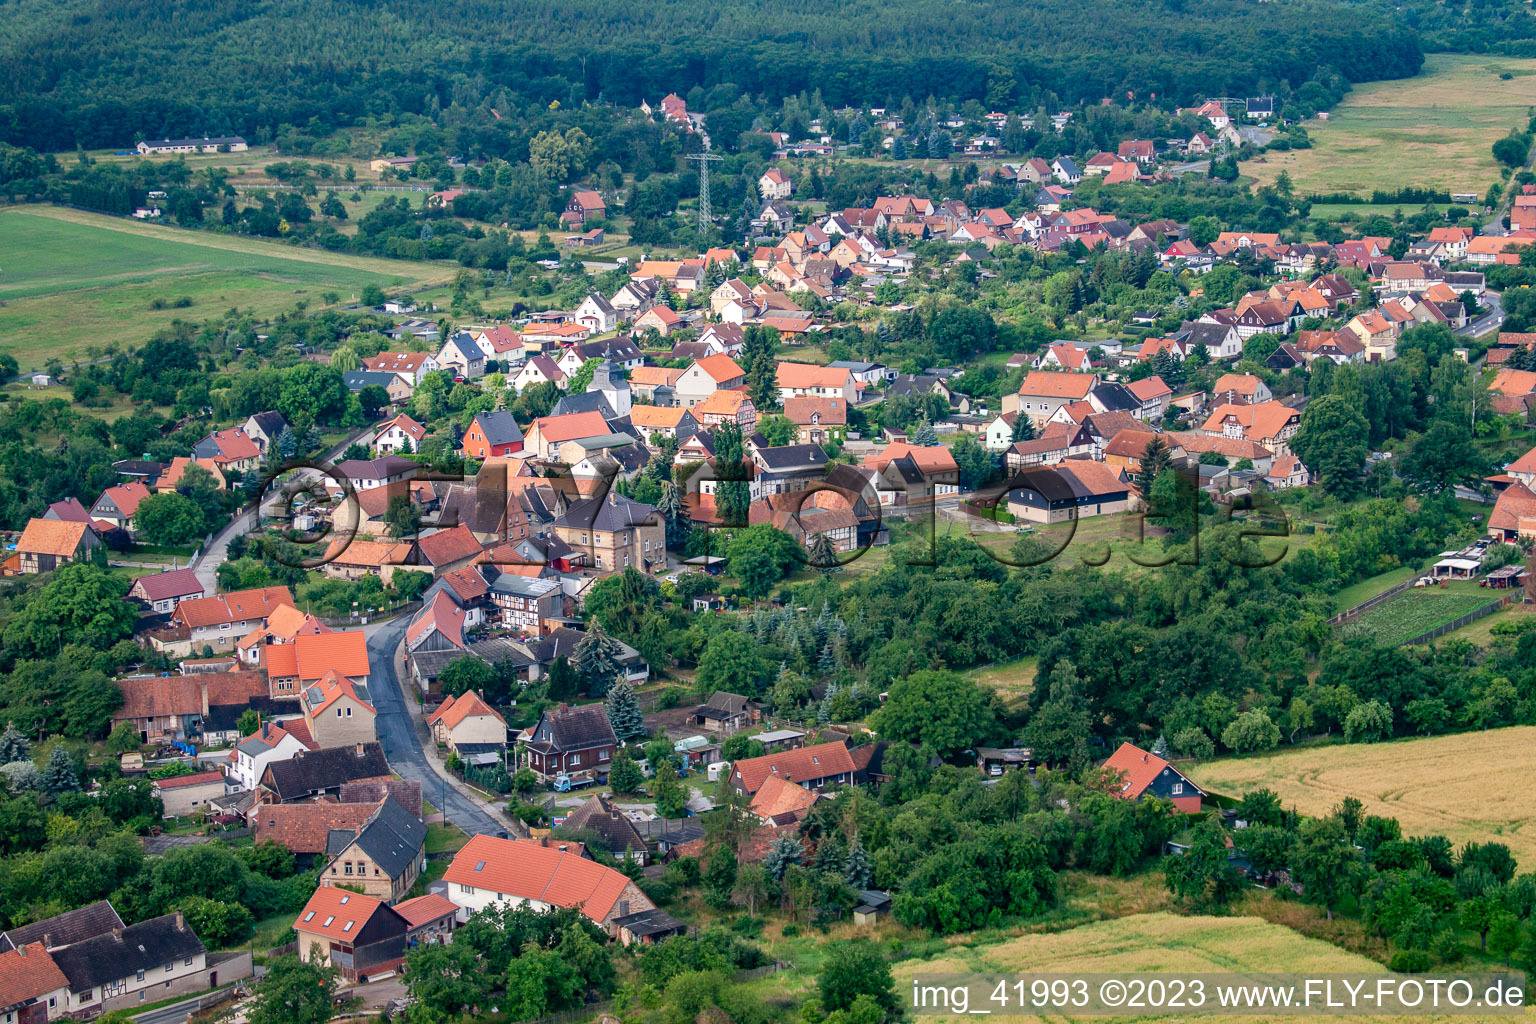 Aerial view of District Wienrode in Blankenburg in the state Saxony-Anhalt, Germany